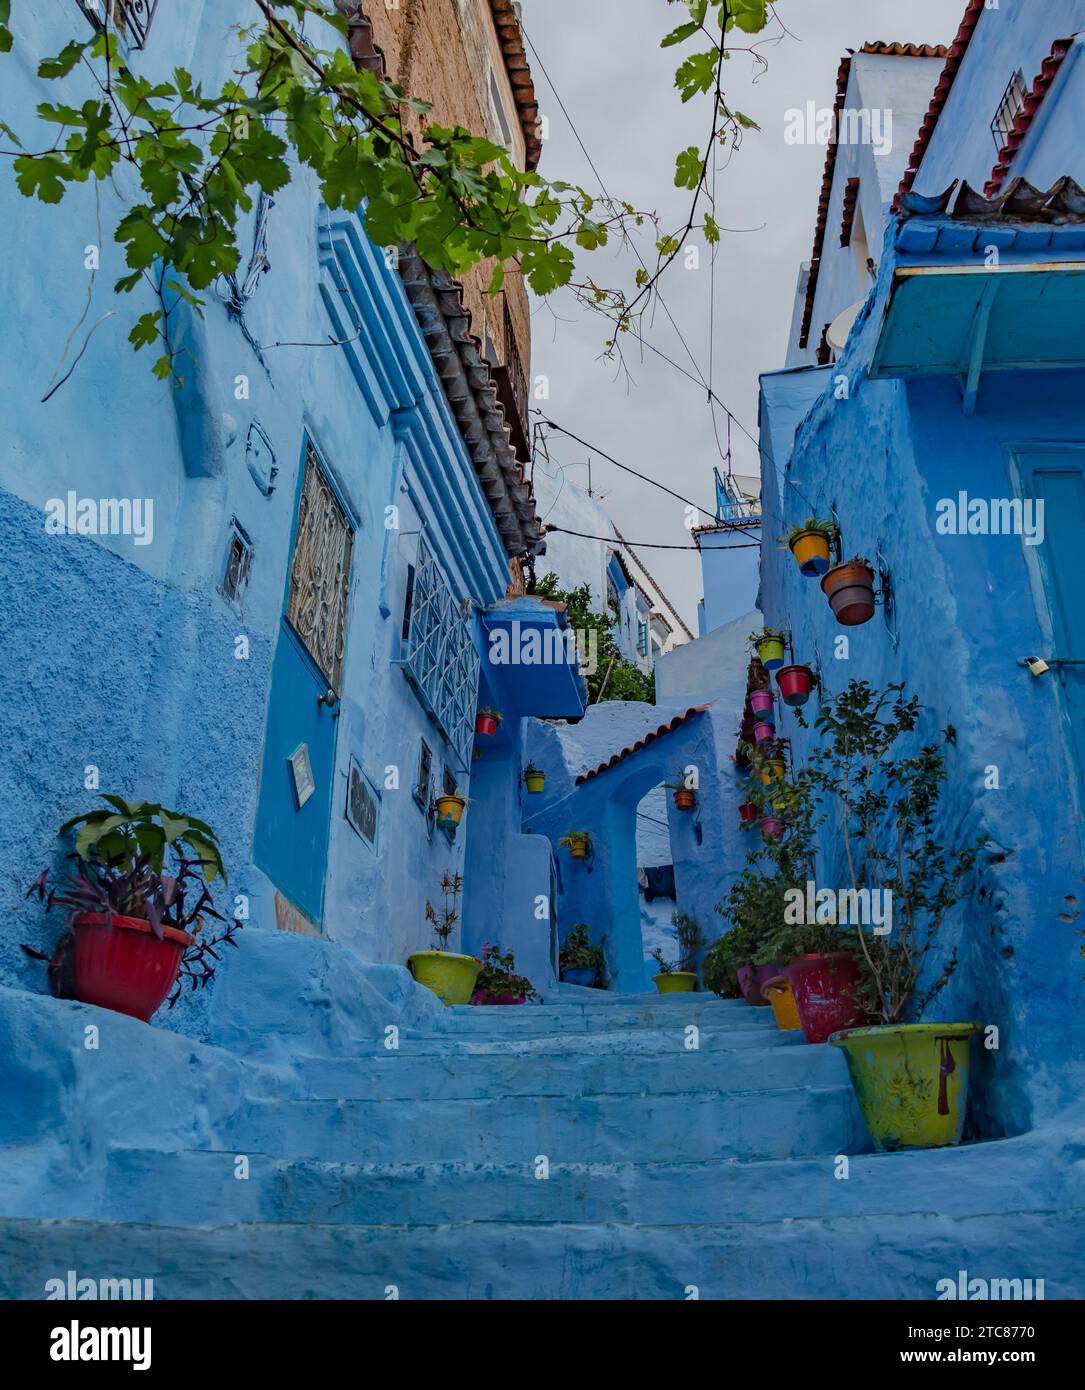 A picture of a blue alley in Chefchaouen Stock Photo